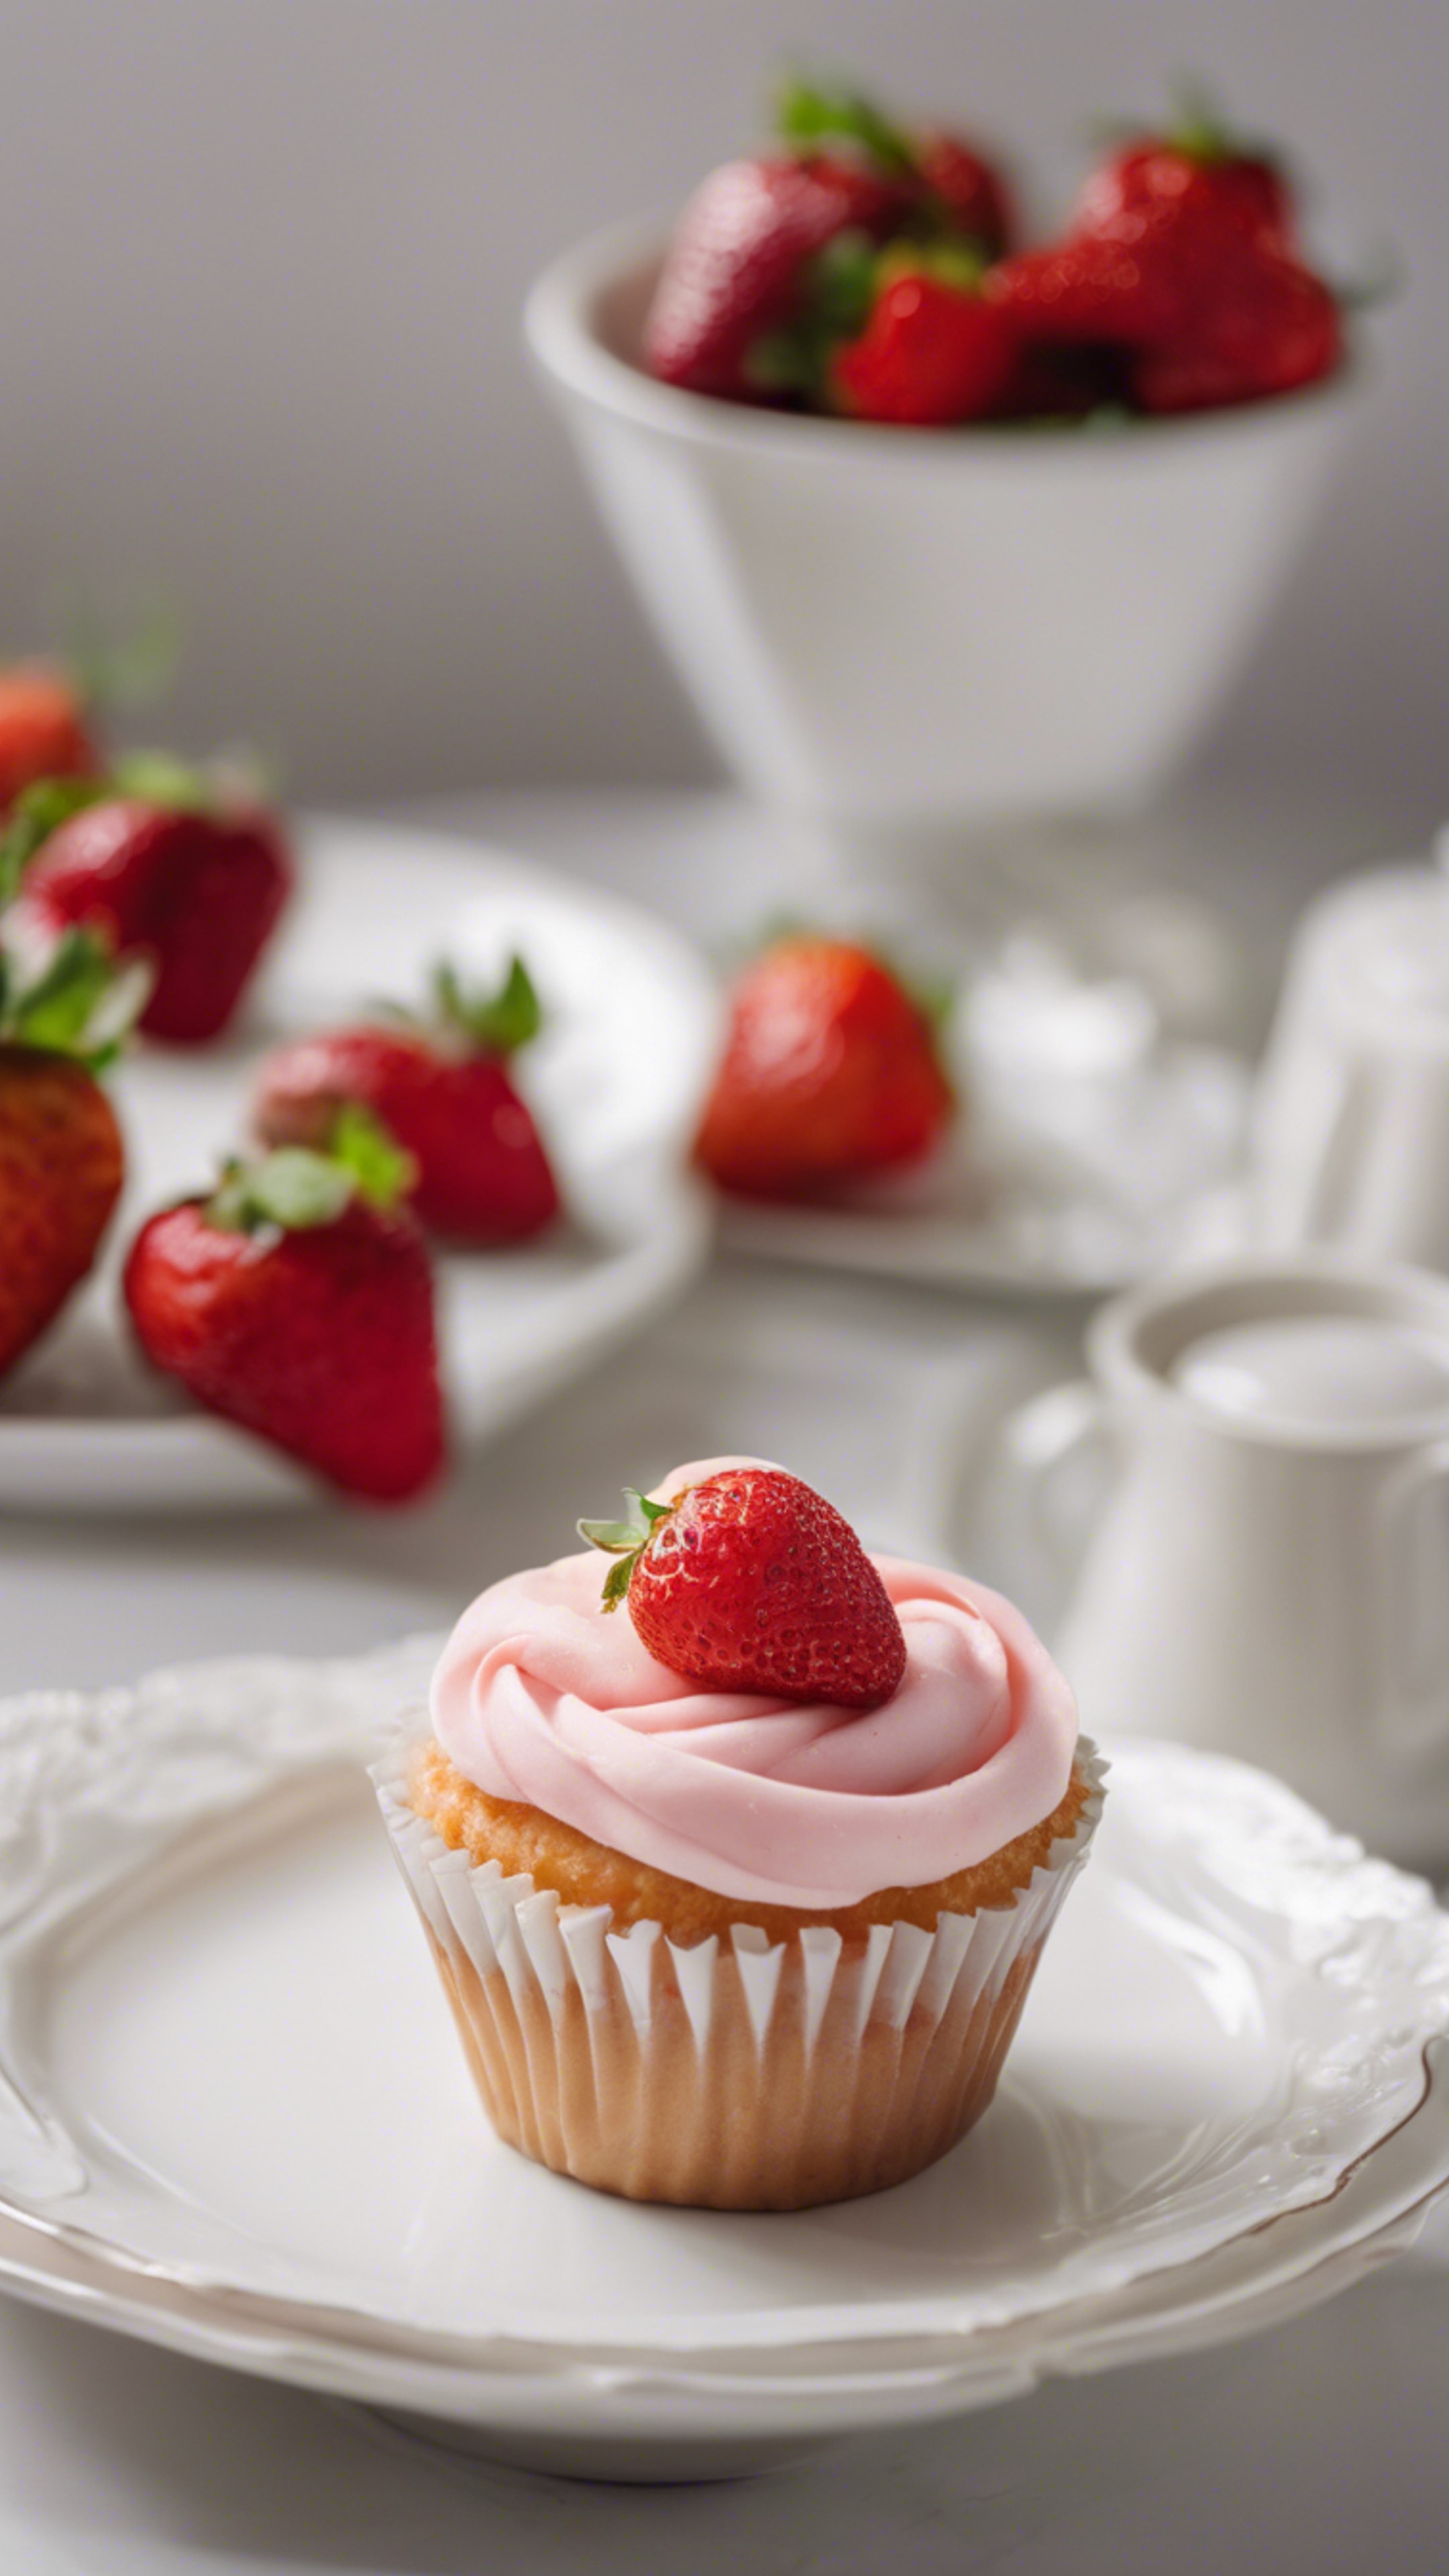 A single strawberry cupcake on a white porcelain plate in bright daylight. Tapet[ddcb3576222e4604b5c8]